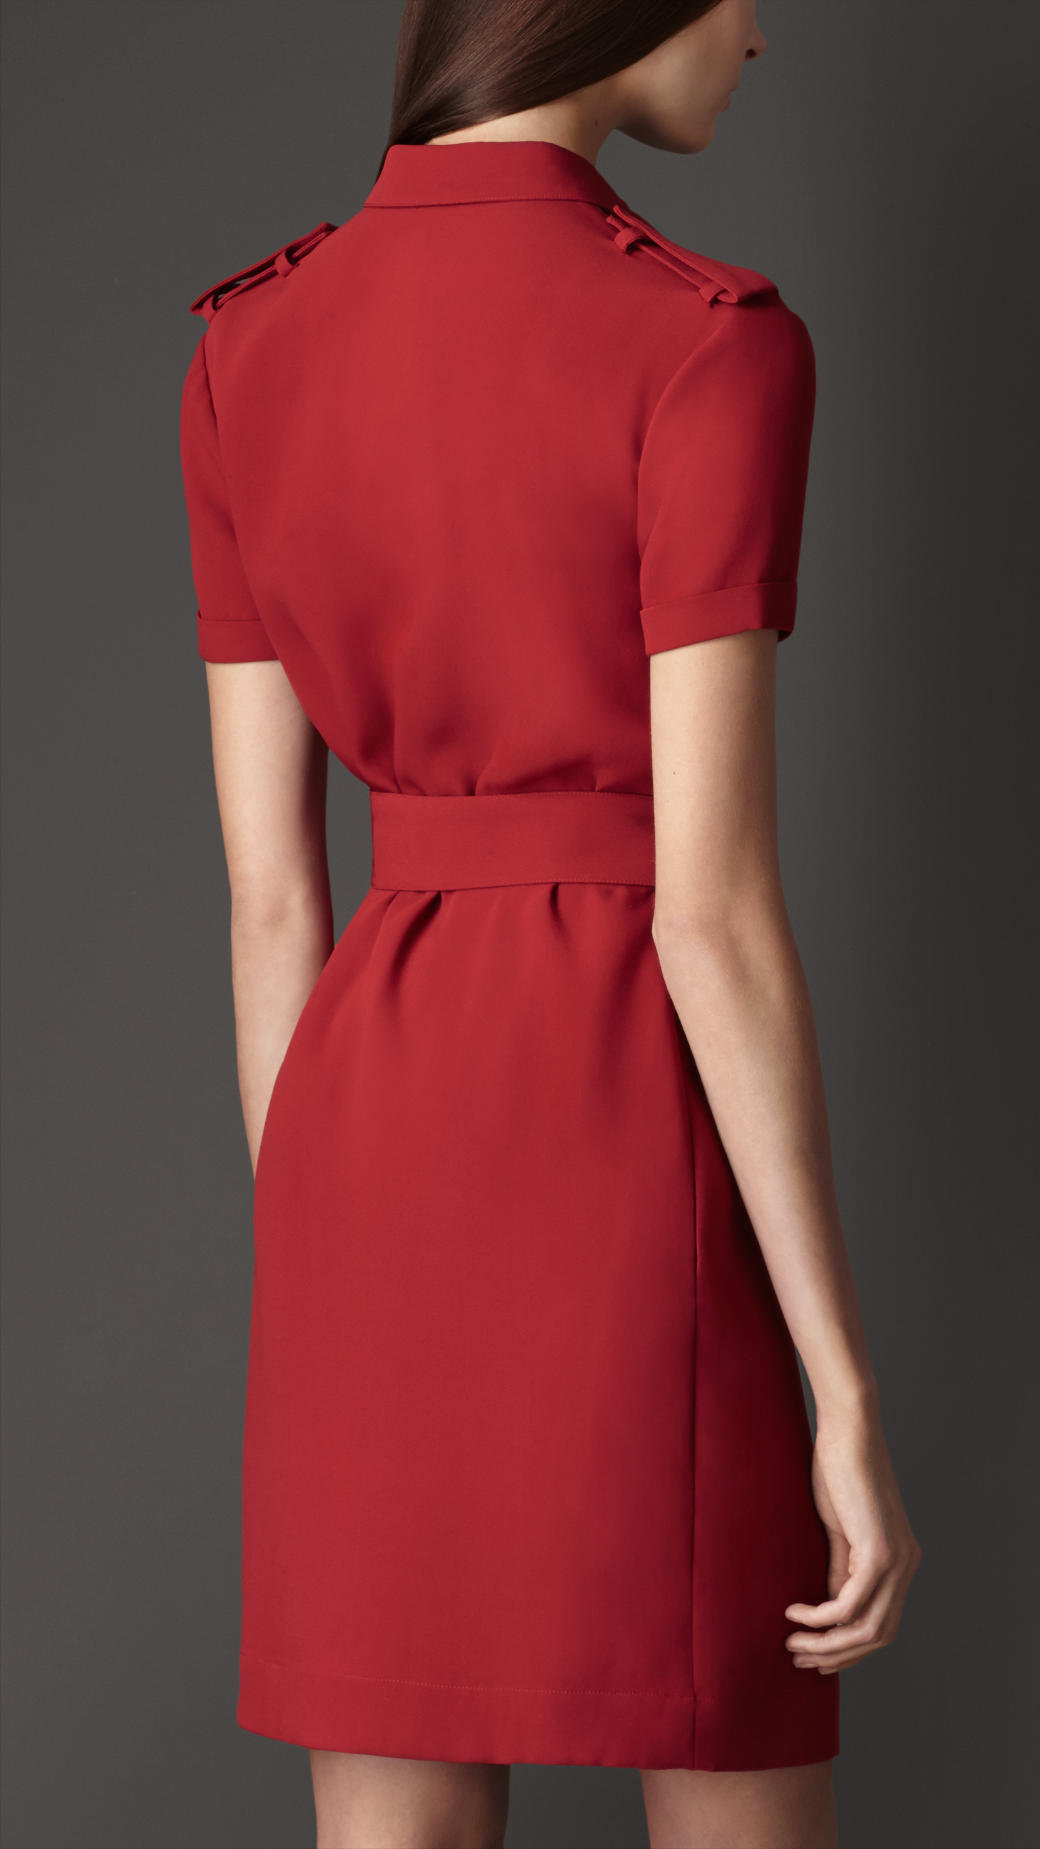 Lyst - Burberry Double Georgette Silk Shirt Dress in Red